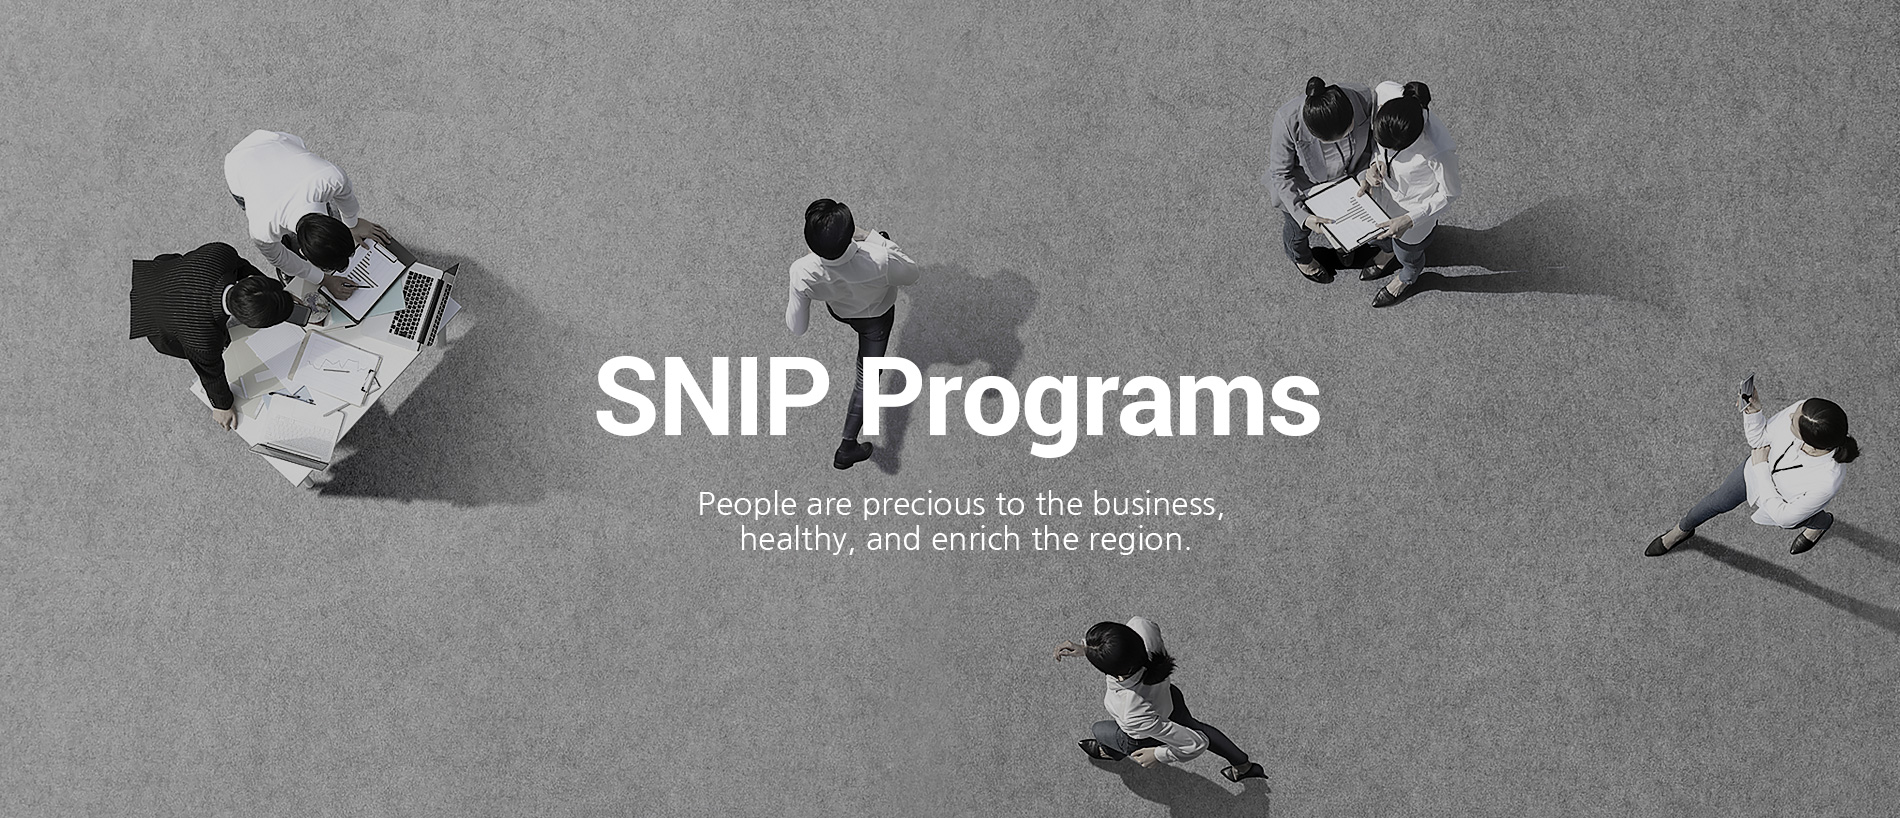 SNIP Programs People are precious to the business, healthy, and enrich the region.